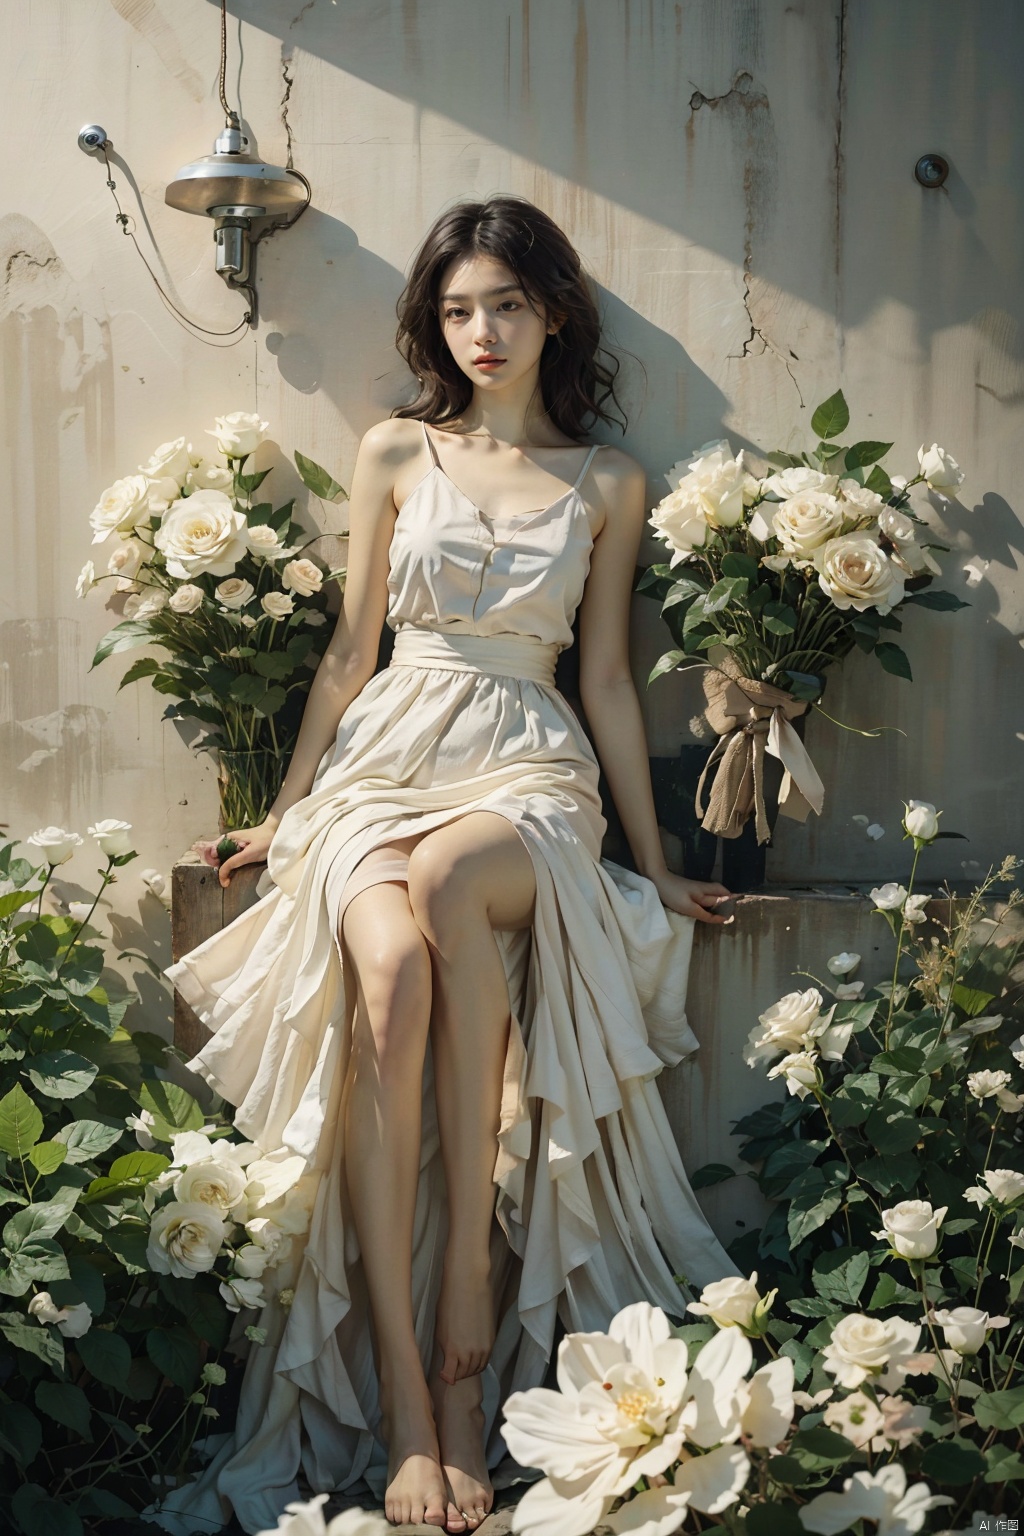  4girls,barefoot,black_hair,bouquet,brown_hair,huge_breasts,dress,flower,grass,leaf,long_hair,lying,multiple_girls,on_back,outdoors,petals,plant,potted_plant,rose,short_hair,white_dress,white_flower,white_rose, (/qingning/), jiqing, mtianmei